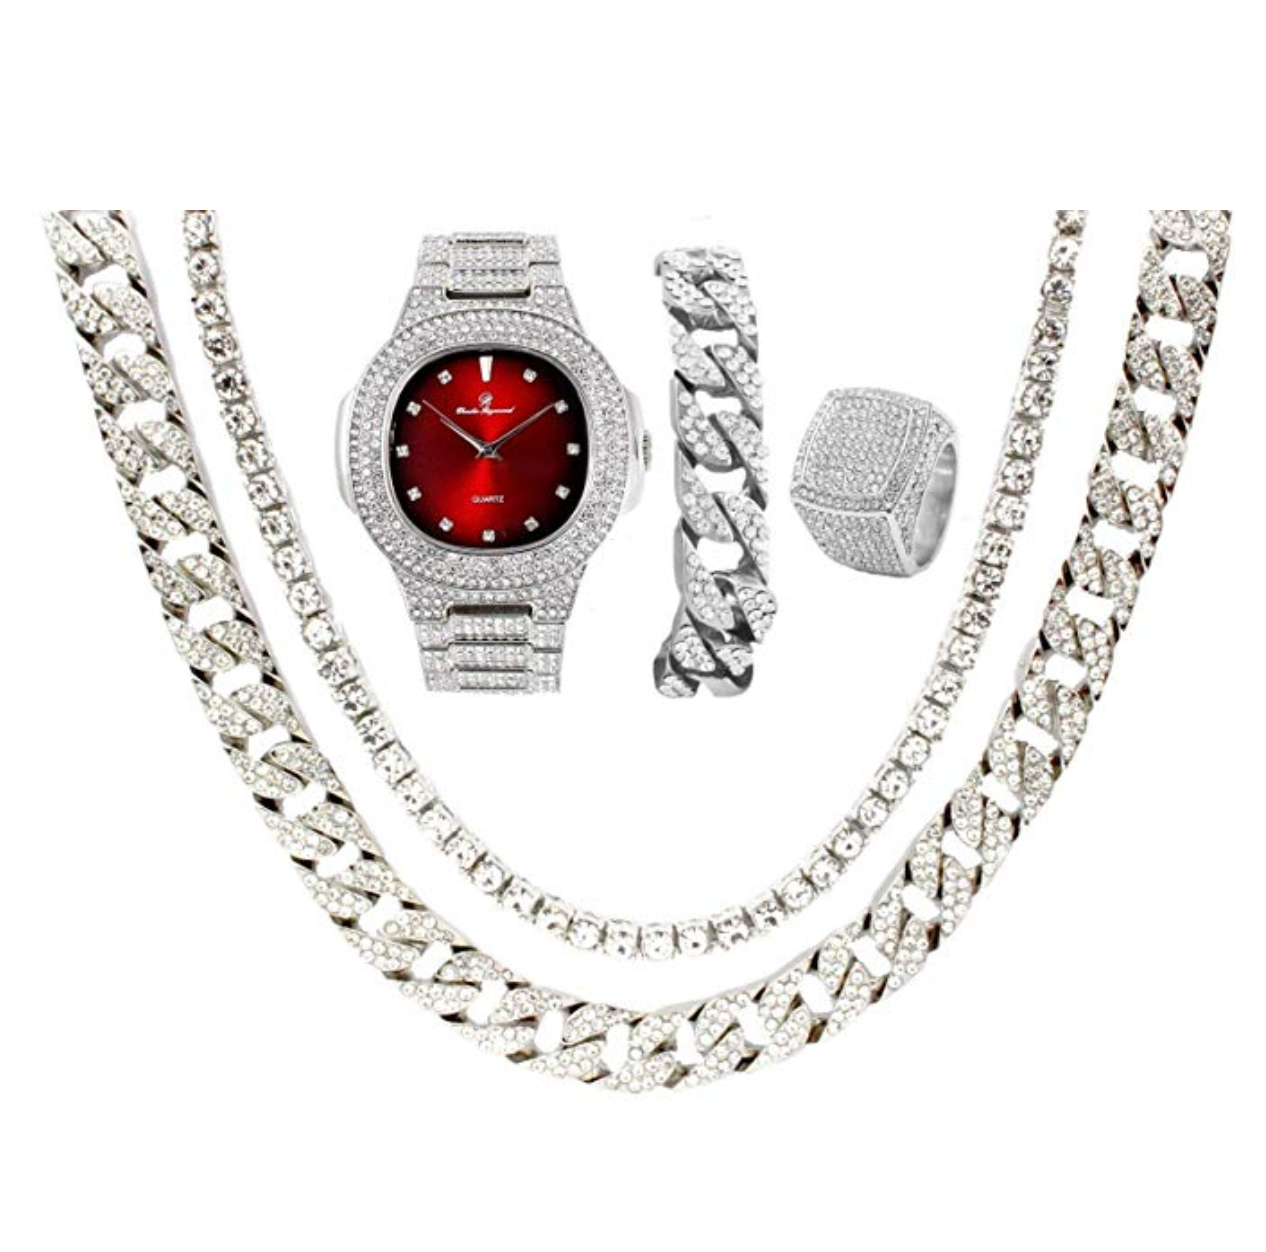 Red Face Simulated Diamond Watch Silver Color Watch Cuban Link Necklace Bracelet Set Tennis Chain Watch Earring Bundle